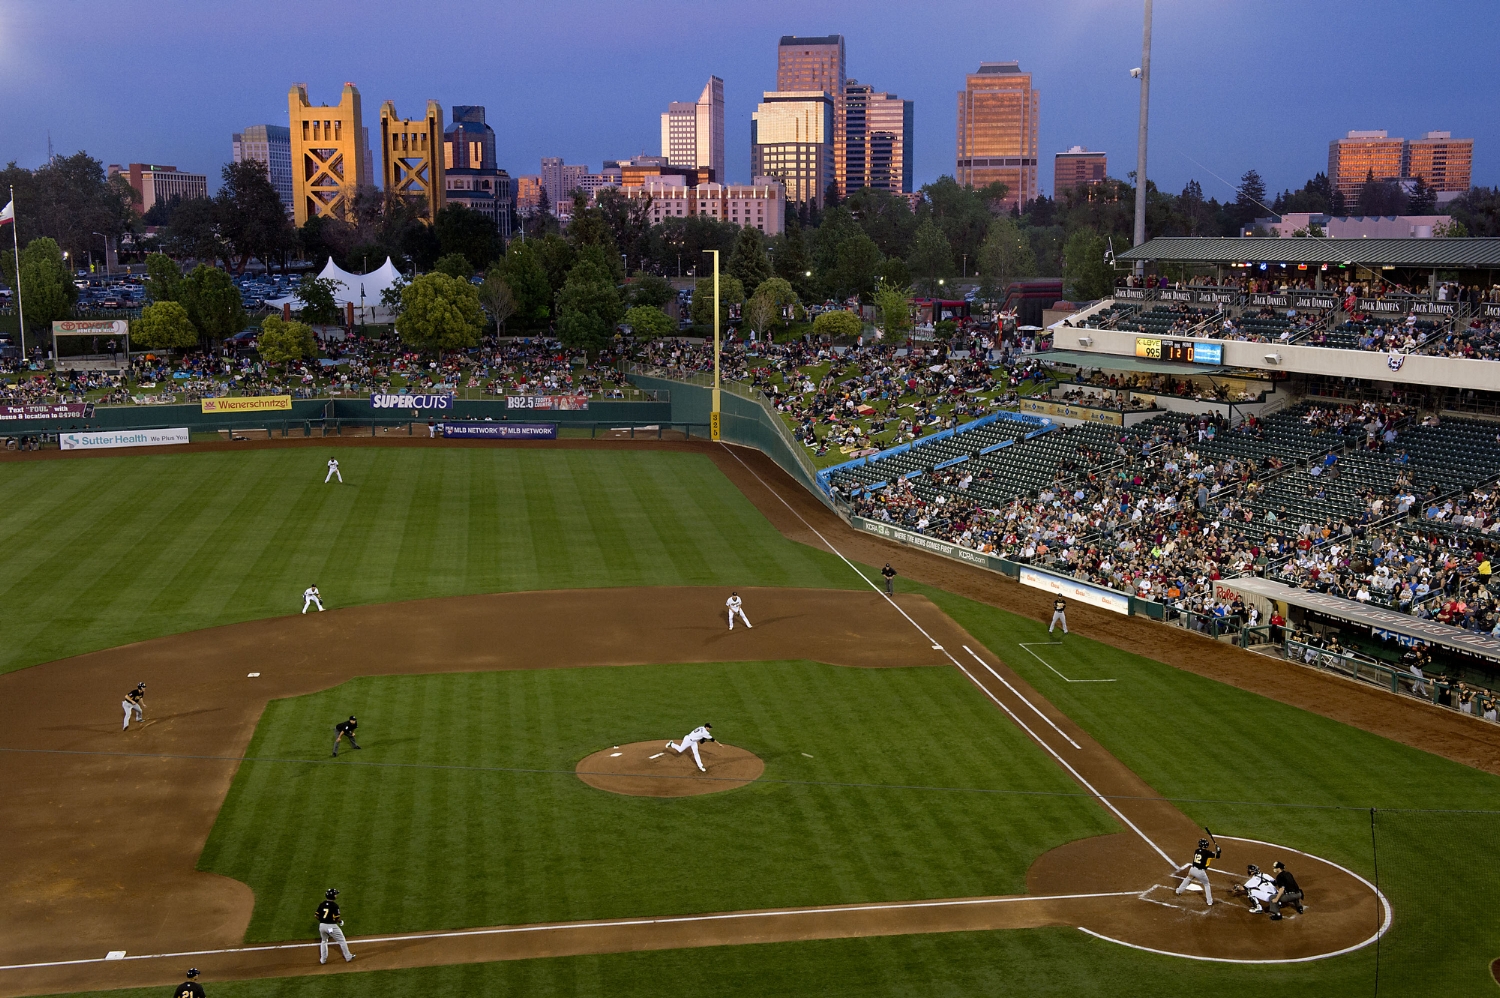  The opening day game between the Sacramento River Cats and Salt Lake Bees at&nbsp; Raley Field in West Sacramento on Friday, April 11, 2014. 